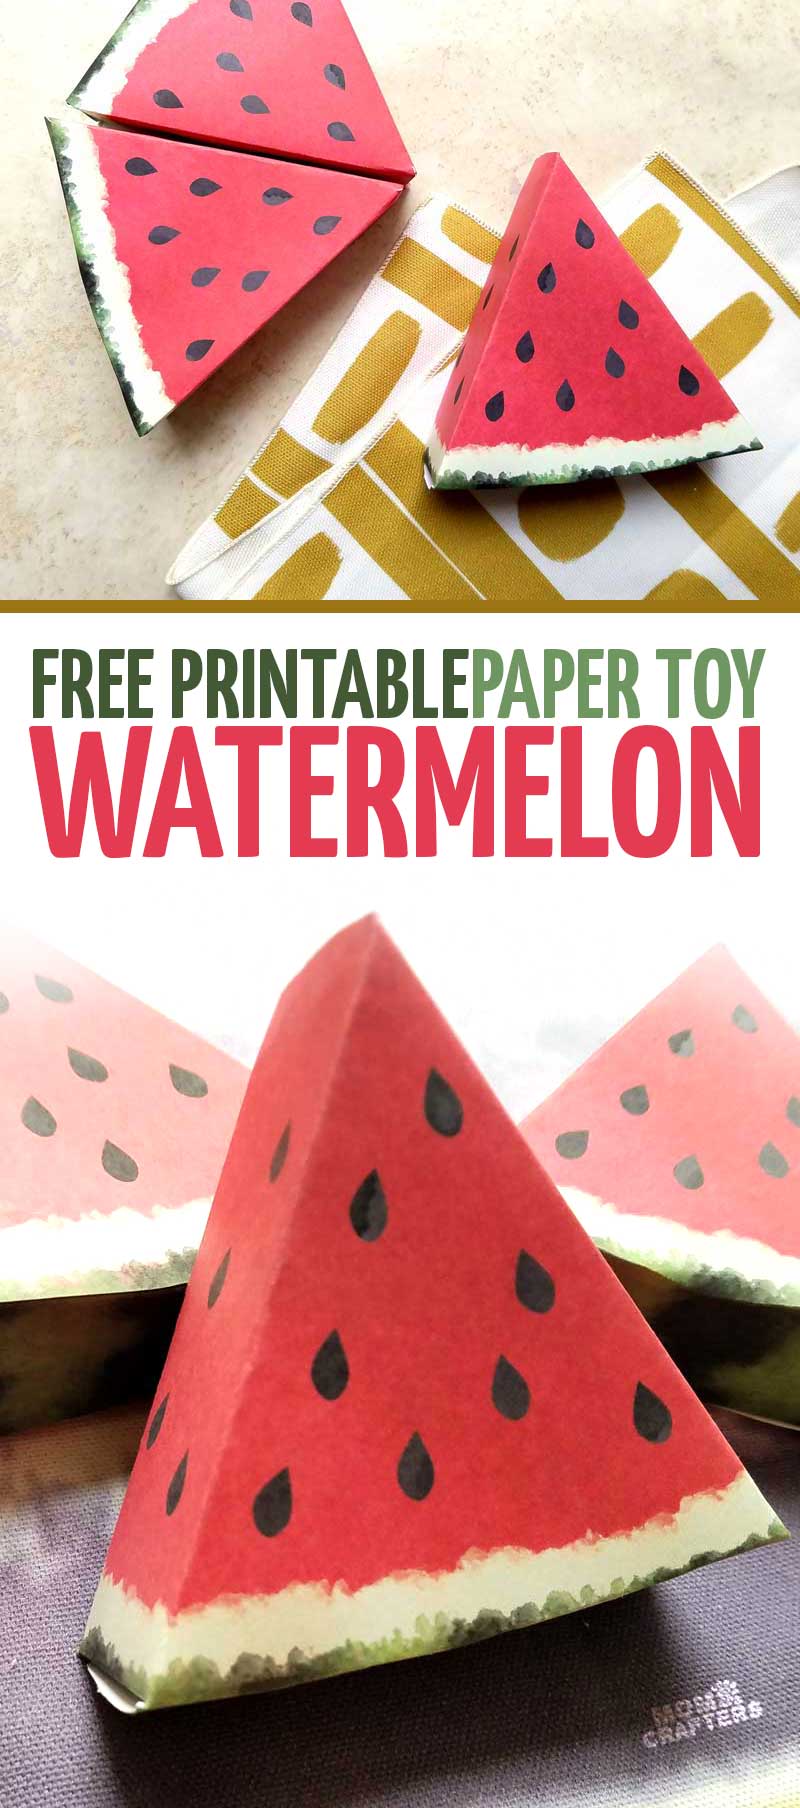 Paper Craft Templates for Play Fruit Watermelon * Moms and Crafters